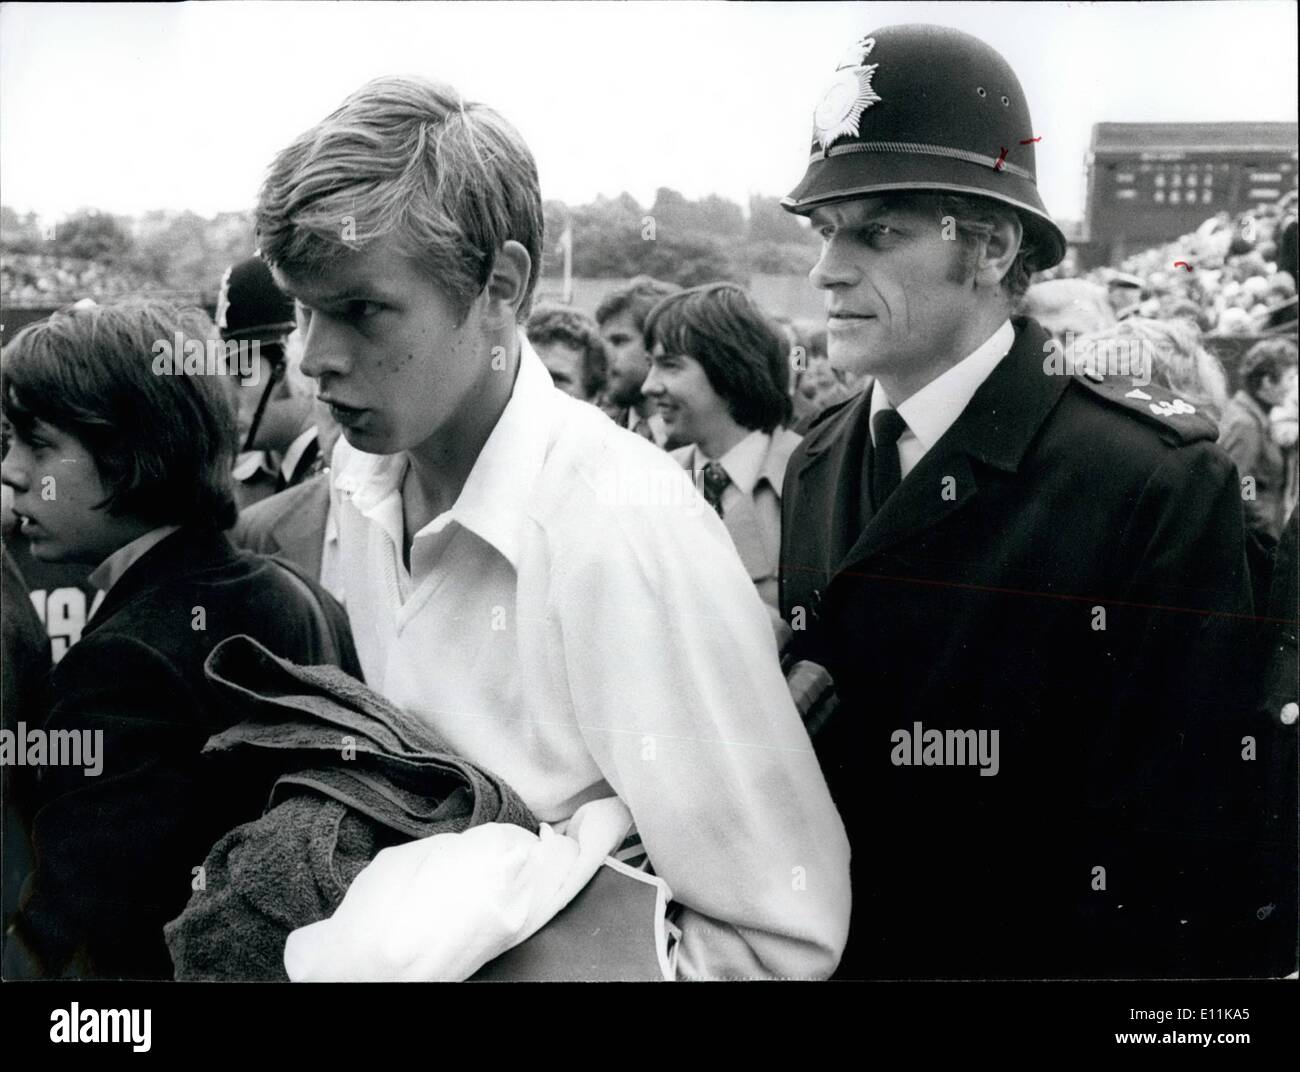 Jun. 06, 1978 - Wimbledon Tennis Championships Buster Mottrom Wins. Photo shows Buster Mottrom being escorted by a policeman as Stock Photo